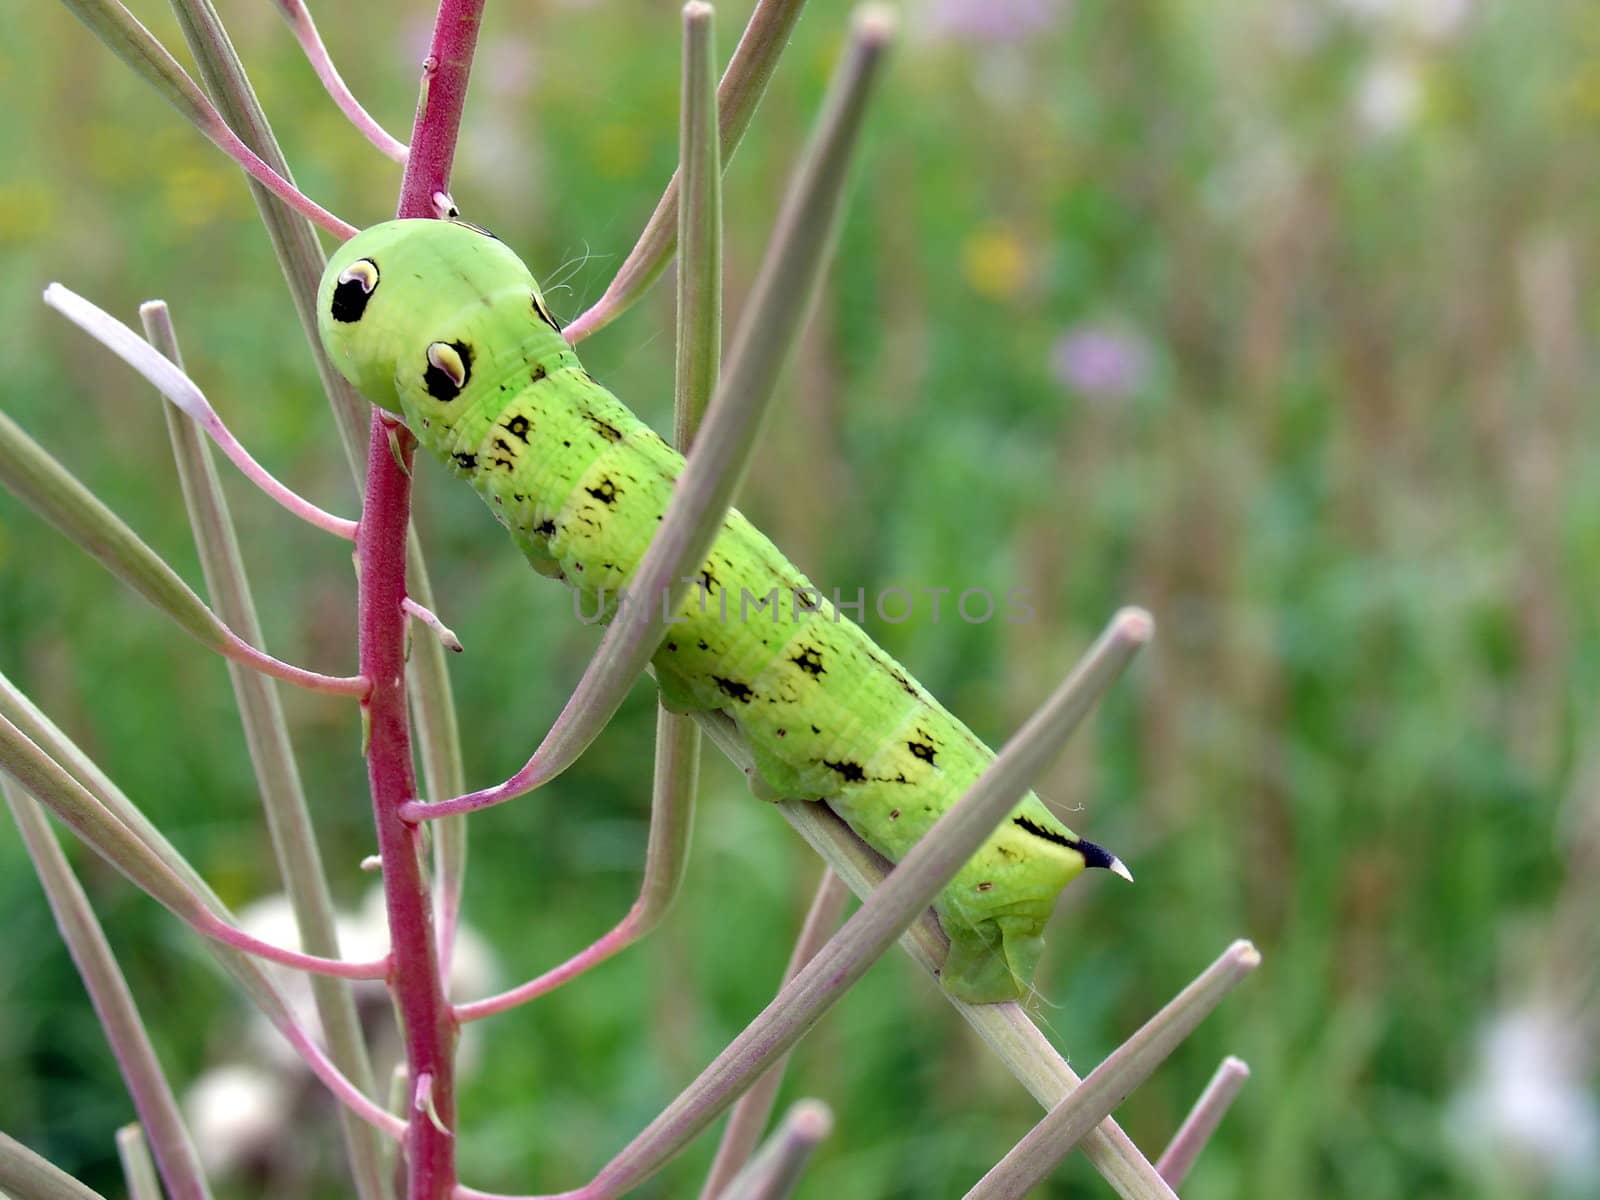 Green caterpillar by tomatto